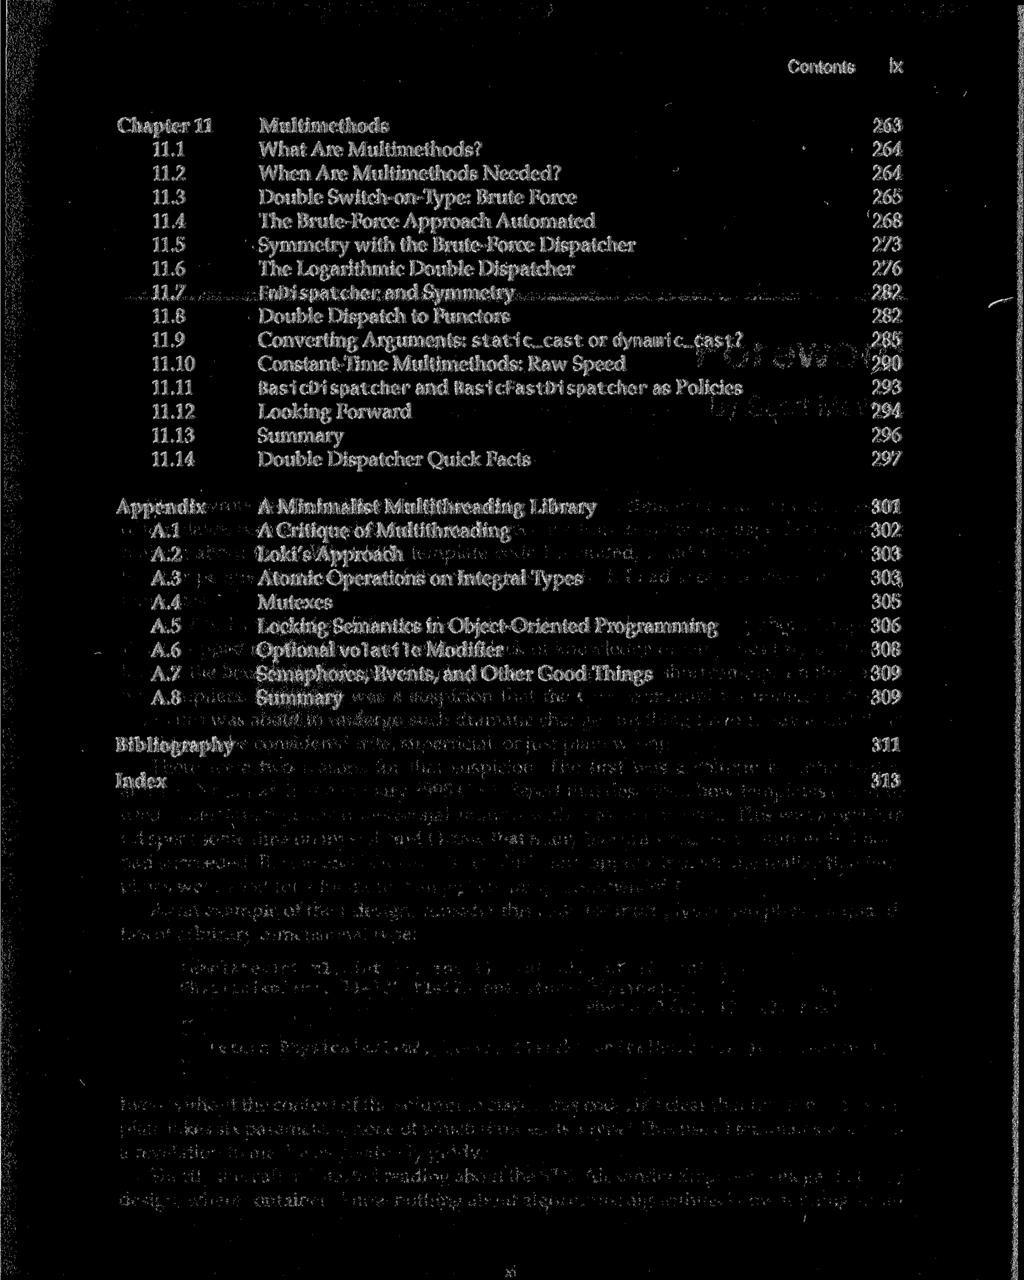 Contents ix Chapter 11 Multimethods 11.1 What Are Multimethods? 11.2 When Are Multimethods Needed? 11.3 Double Switch-on-Type: Brute Force 11.4 The Brute-Force Approach Automated 11.